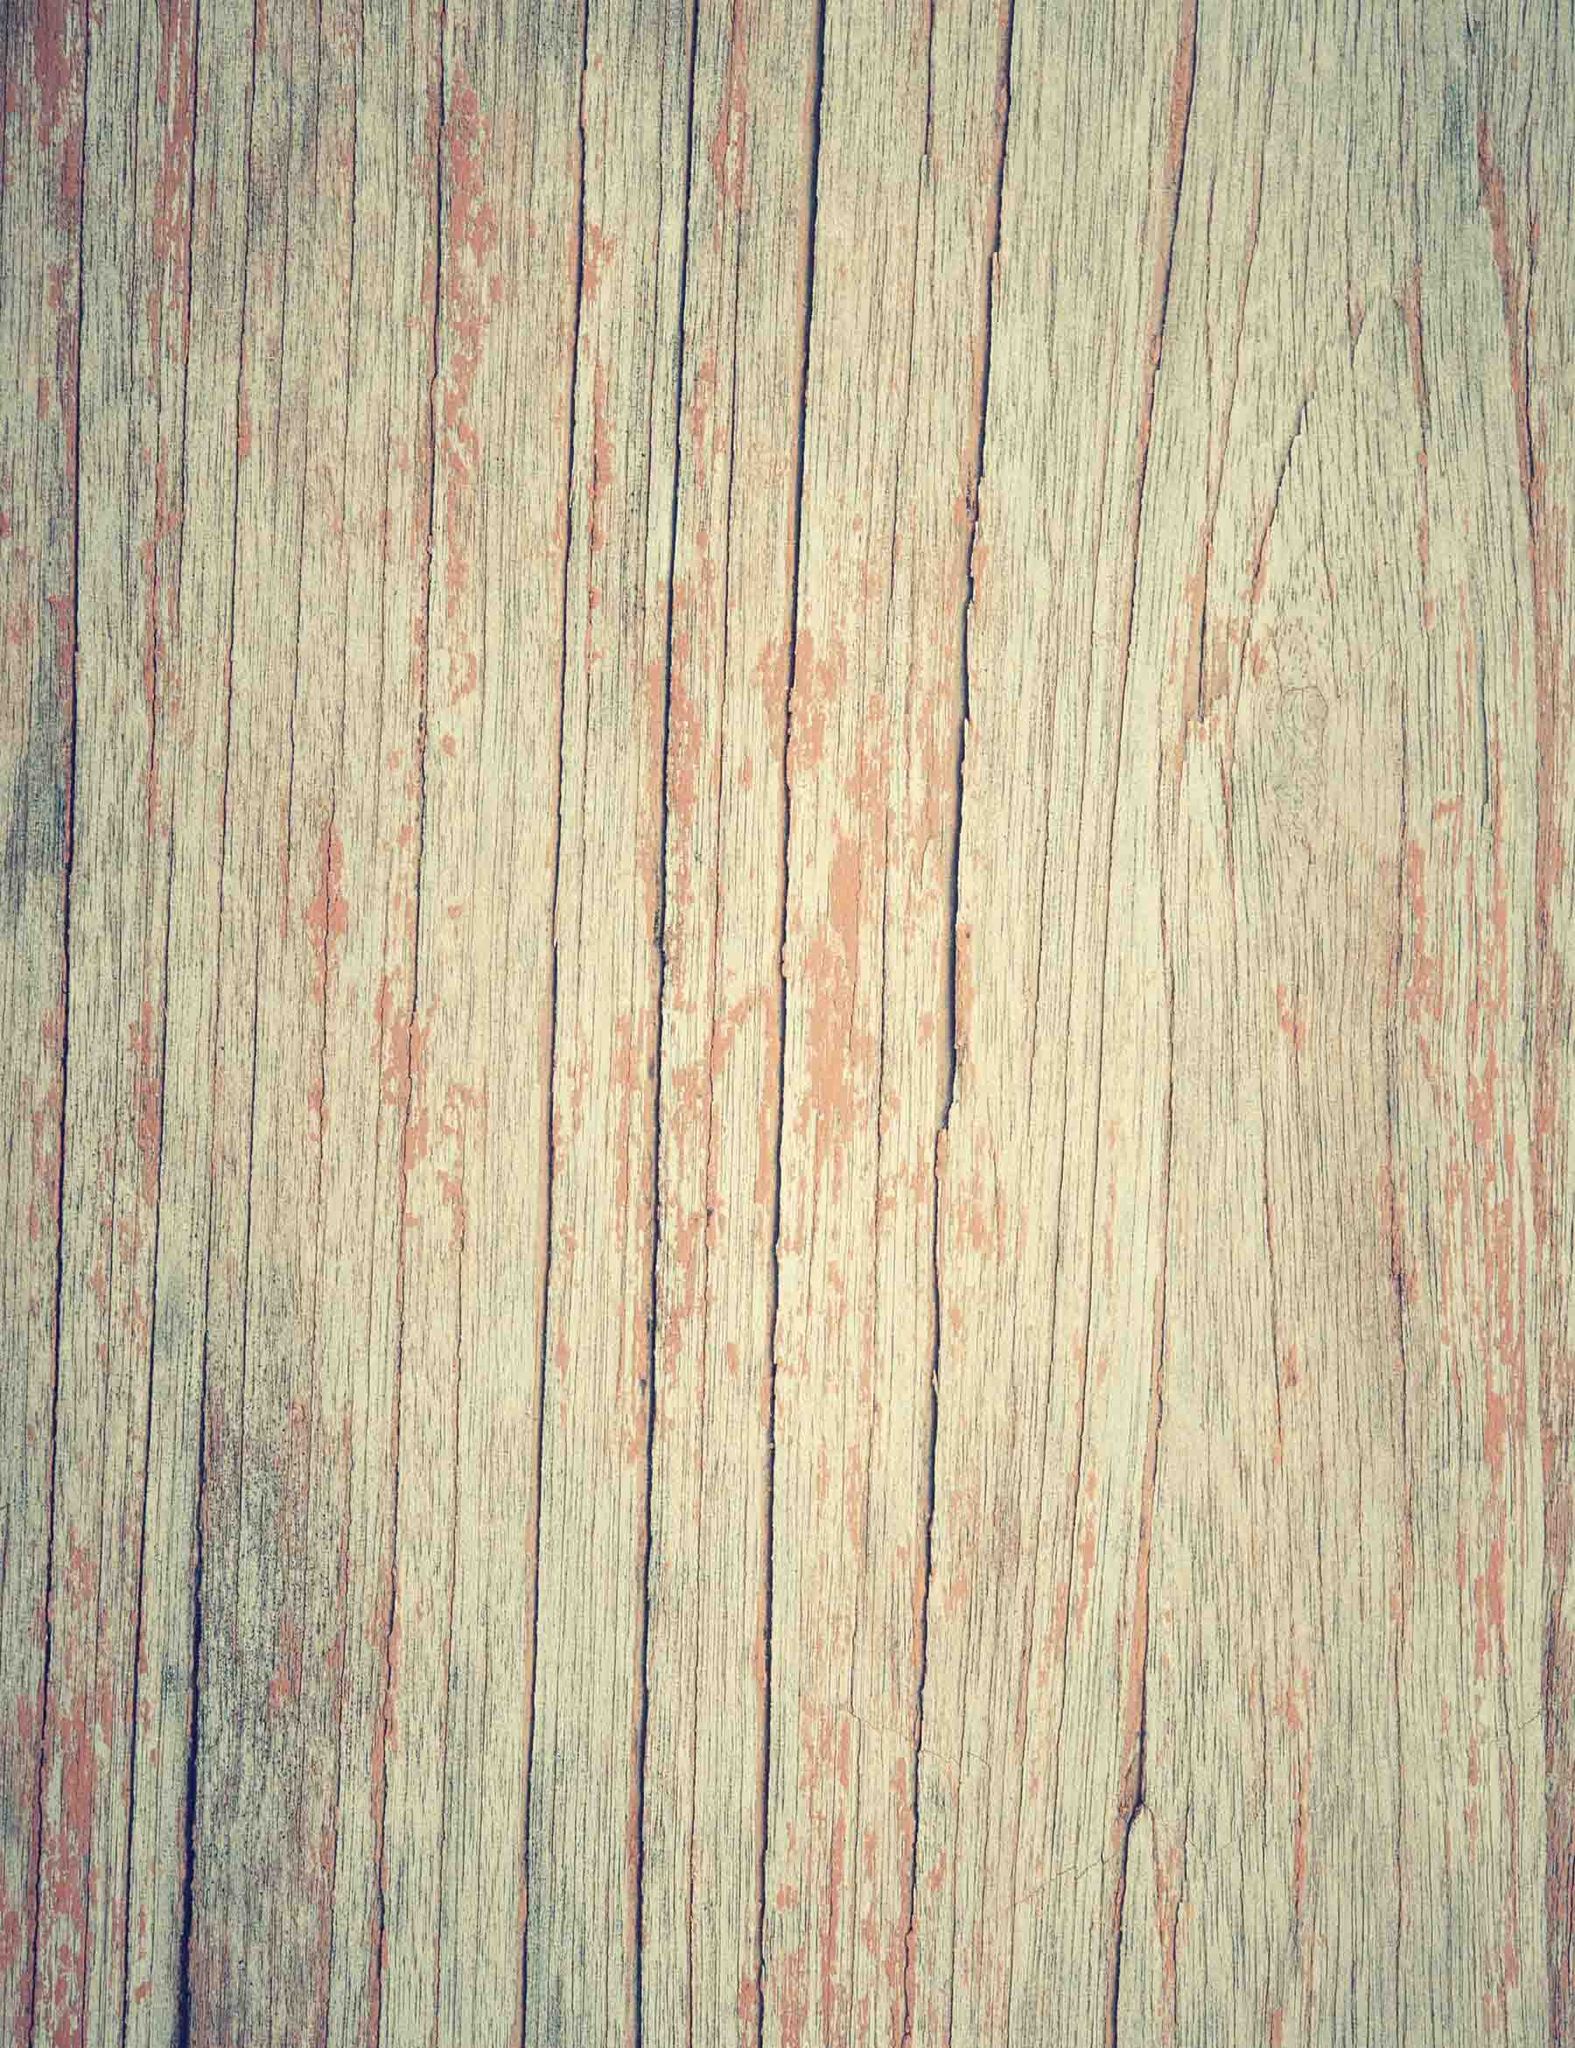 Cyan Faded Wooden Wall With Cracks Backdrop For Photography – Shop ...